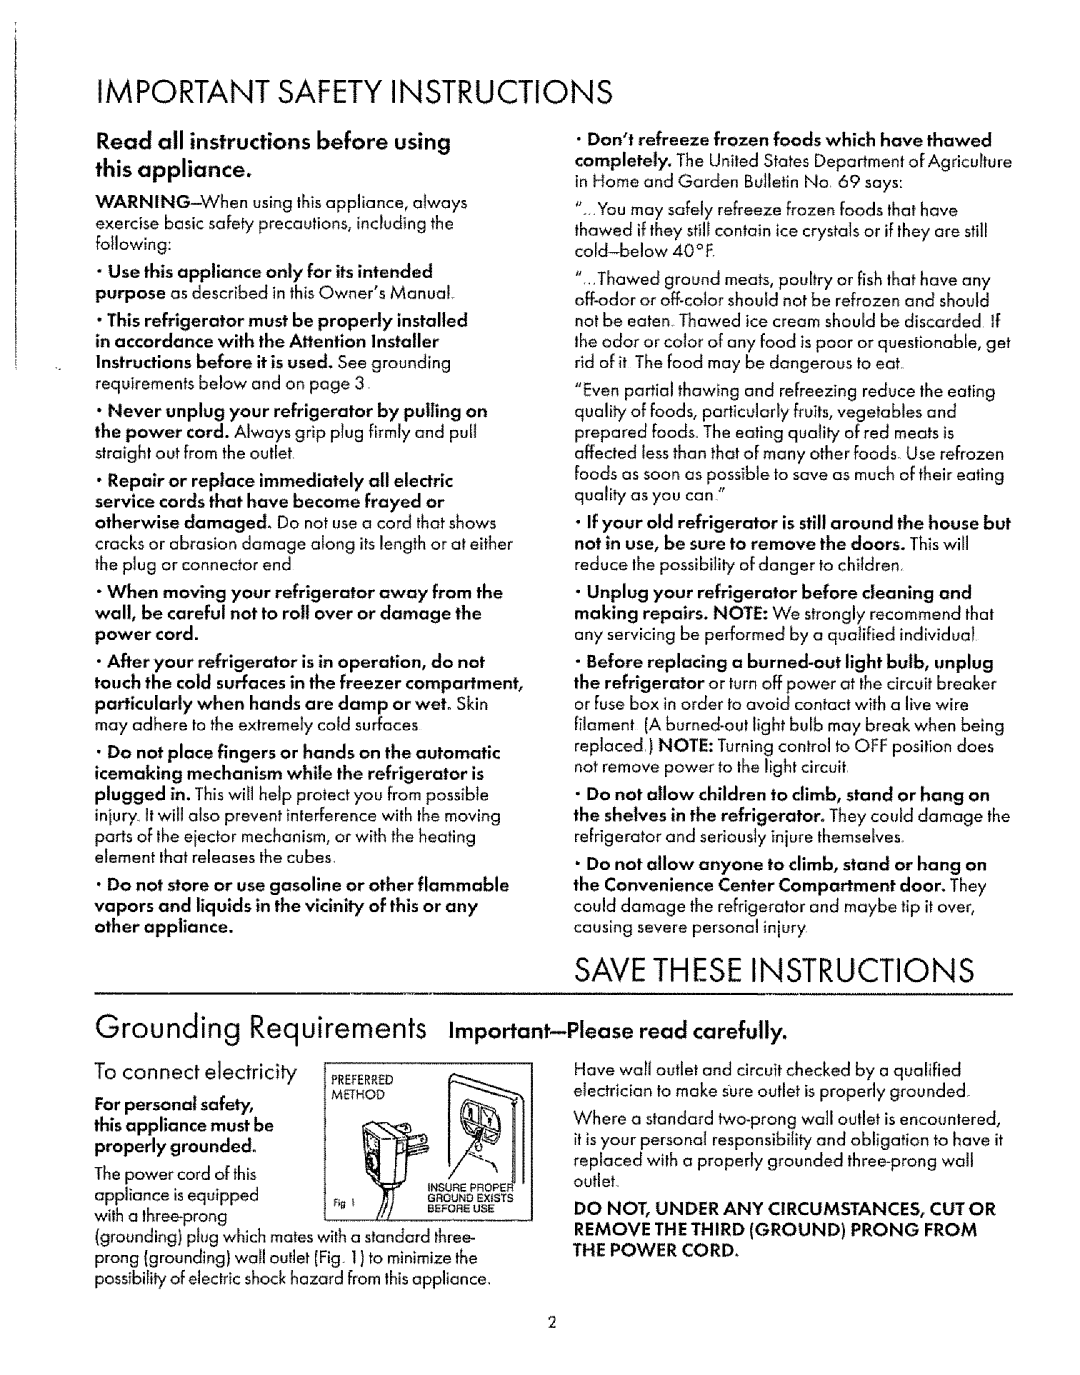 Sears 8EAIRS owner manual Savetheseinstructions, Important Safety Instructions, this appliance, To connect electricity 